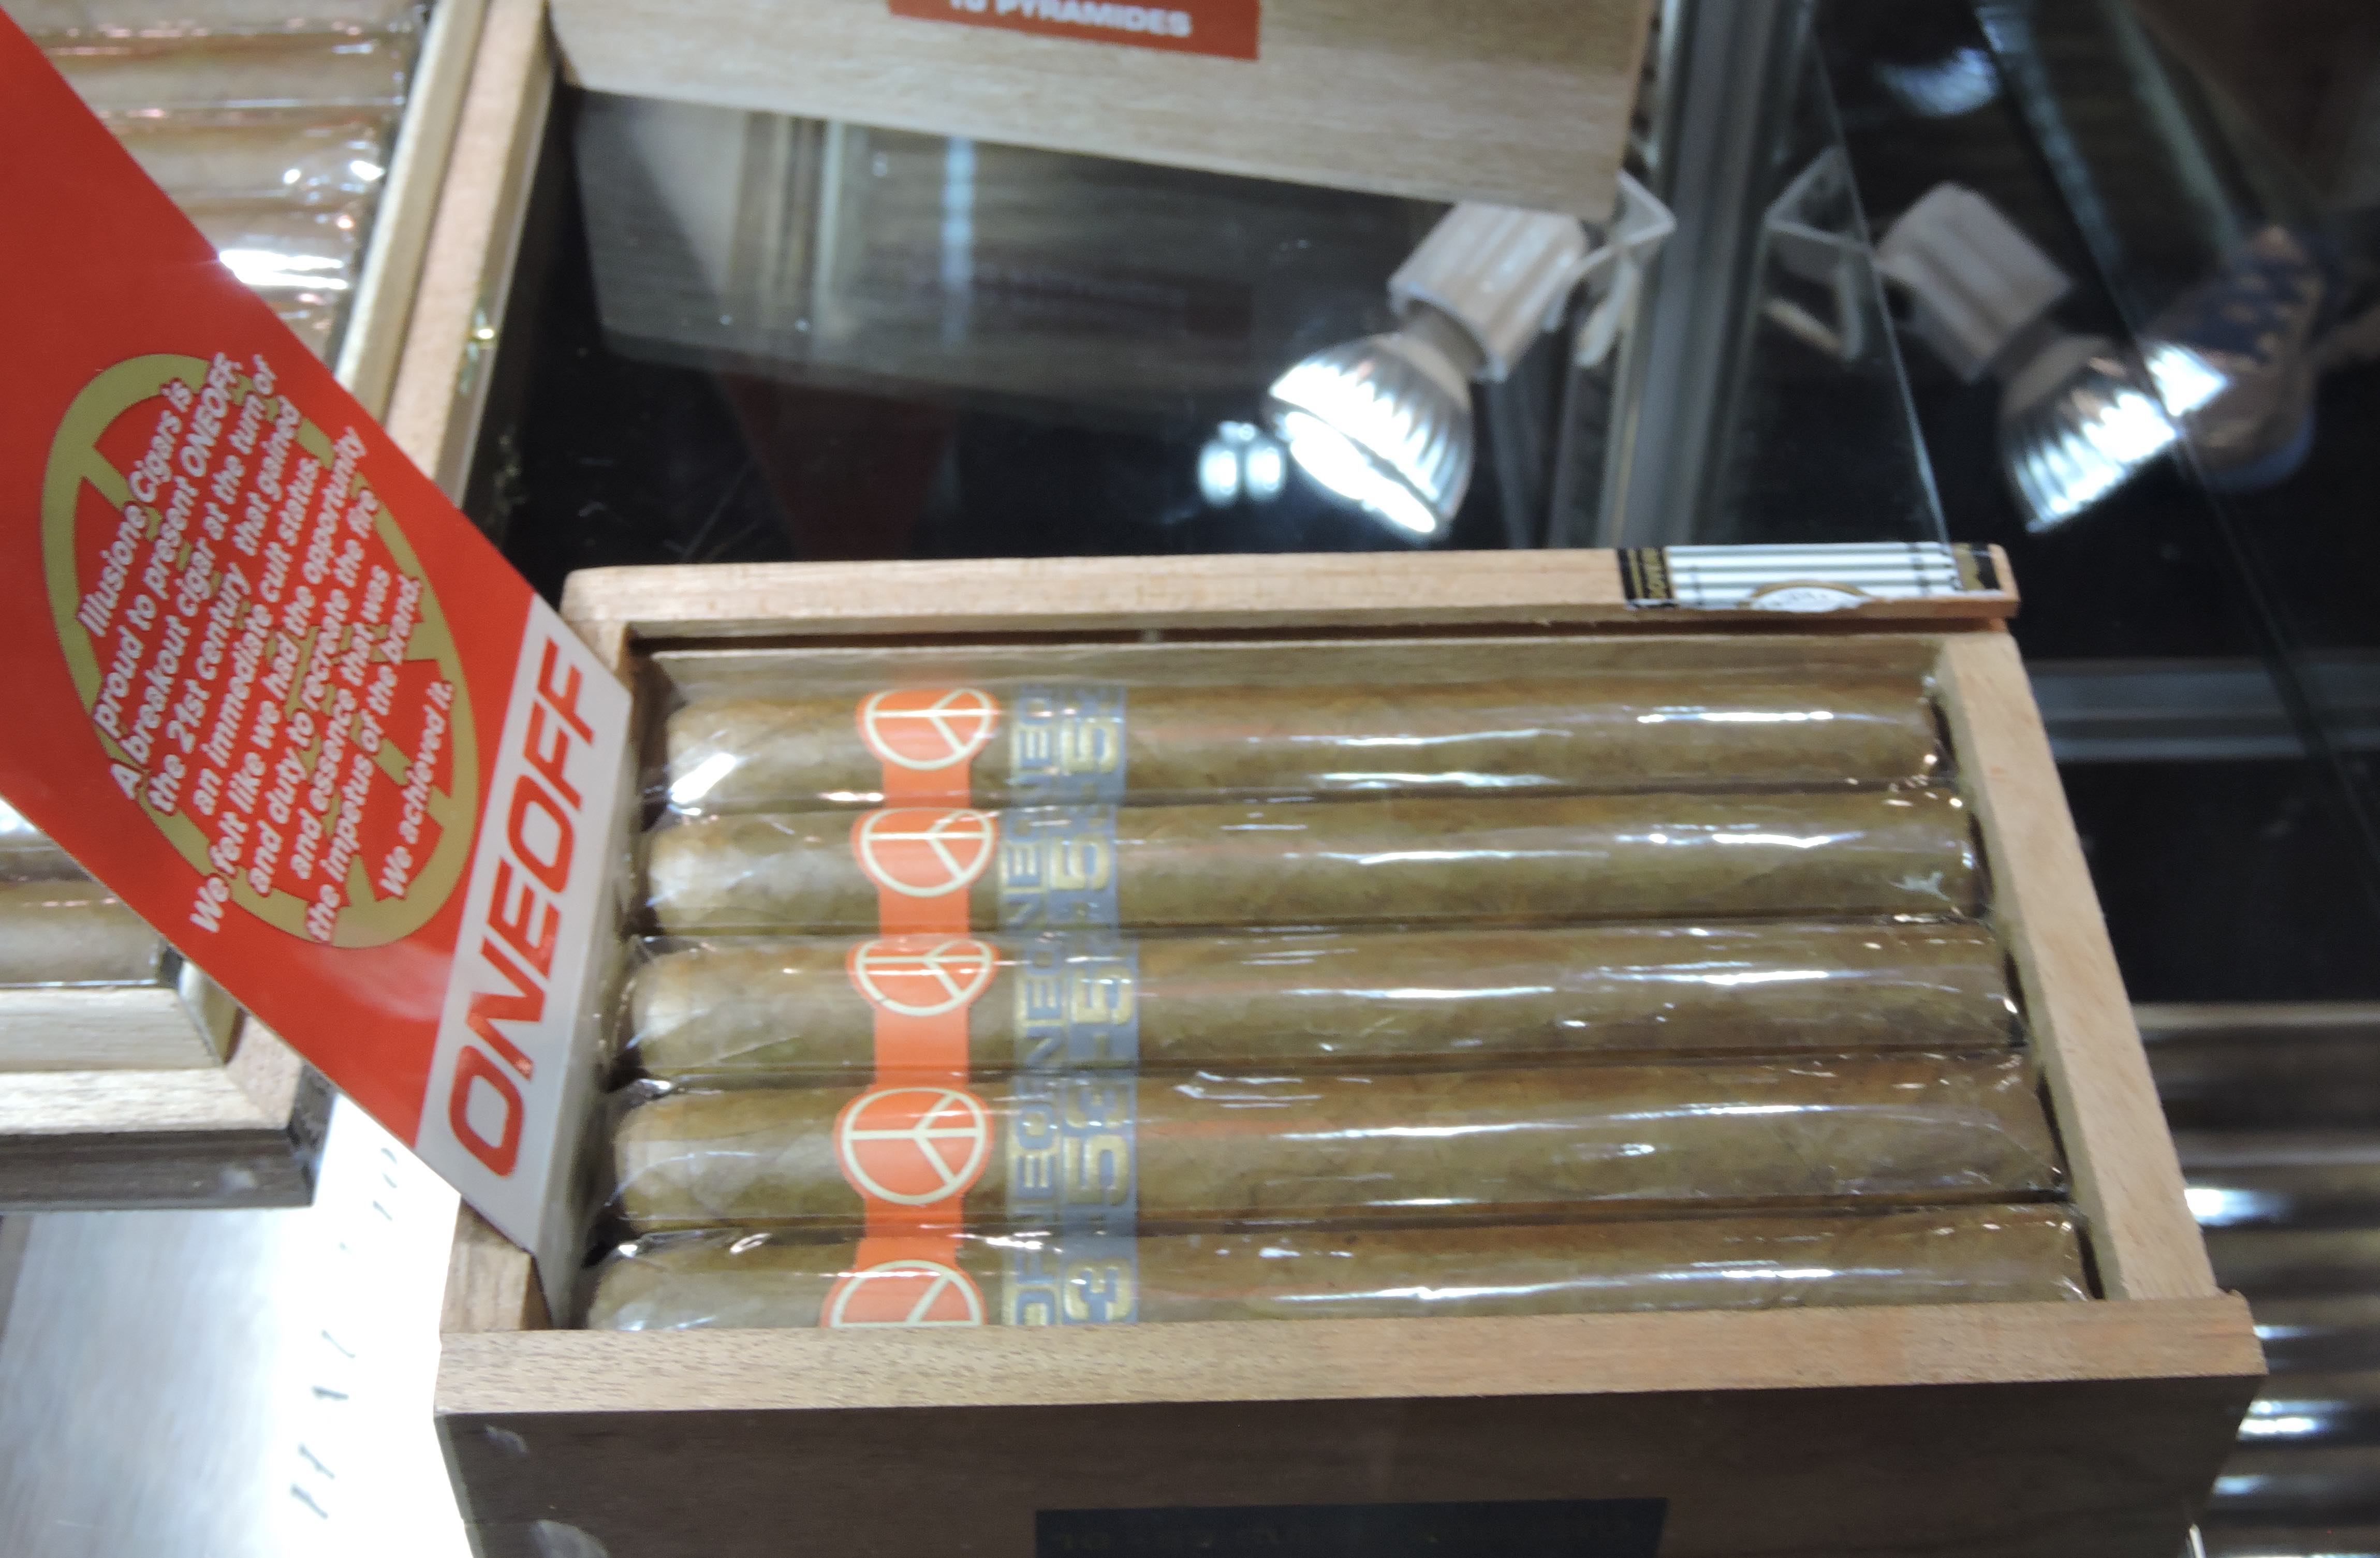 Packaging of the OneOff +53 Super Robusto 